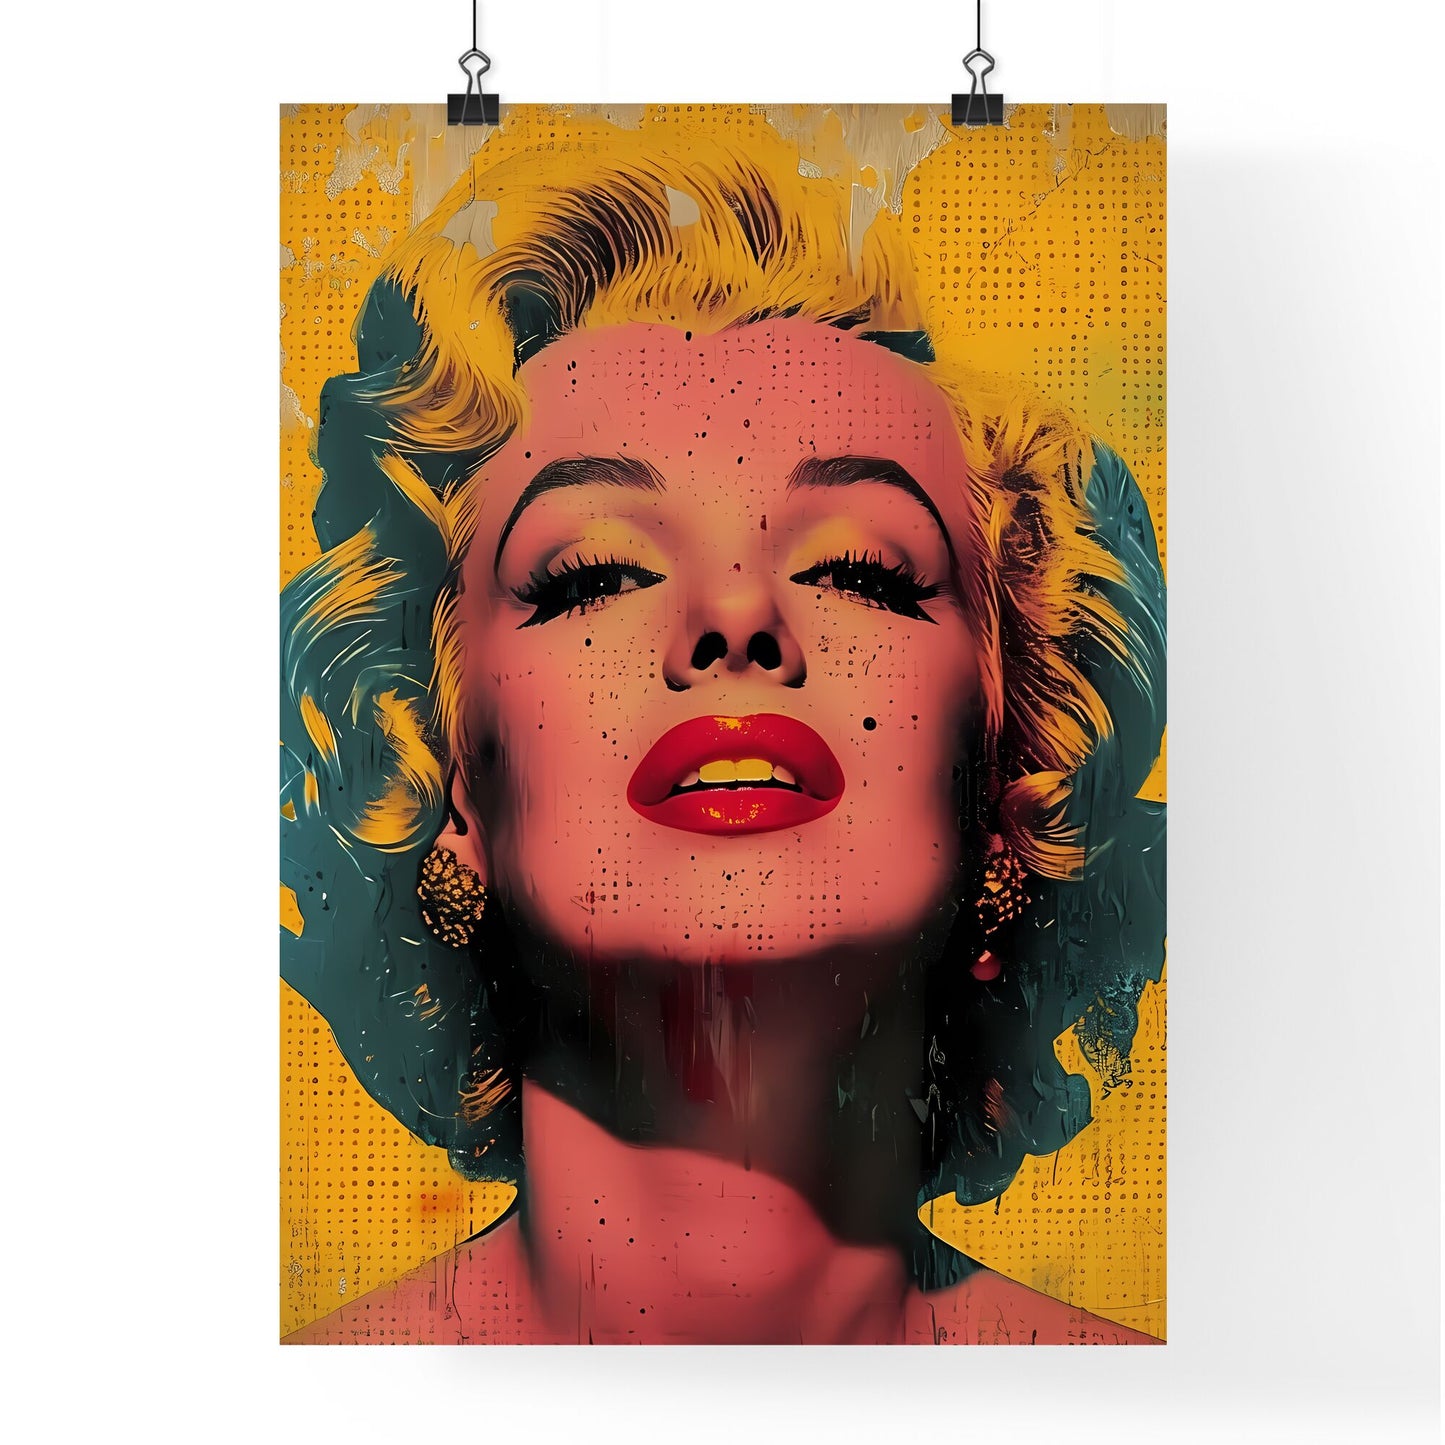 A striking half-body portrait of Marilyn Monroe - Art print of a woman with blonde hair and red lipstick Default Title